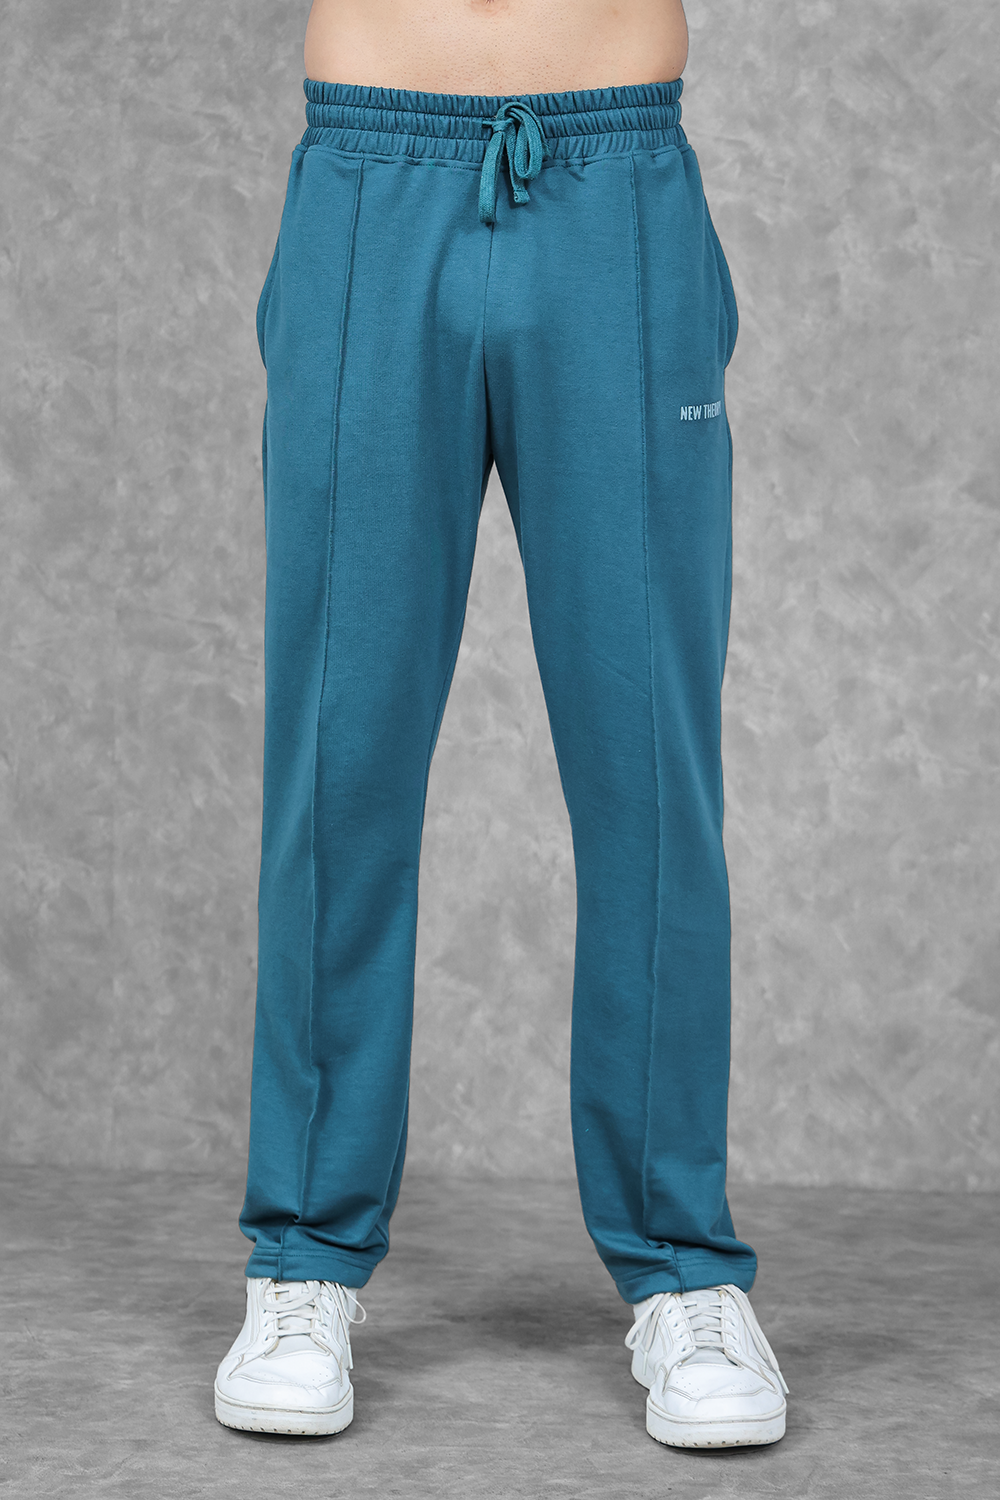 Studio Straight Fit Jogger- Azure Teal